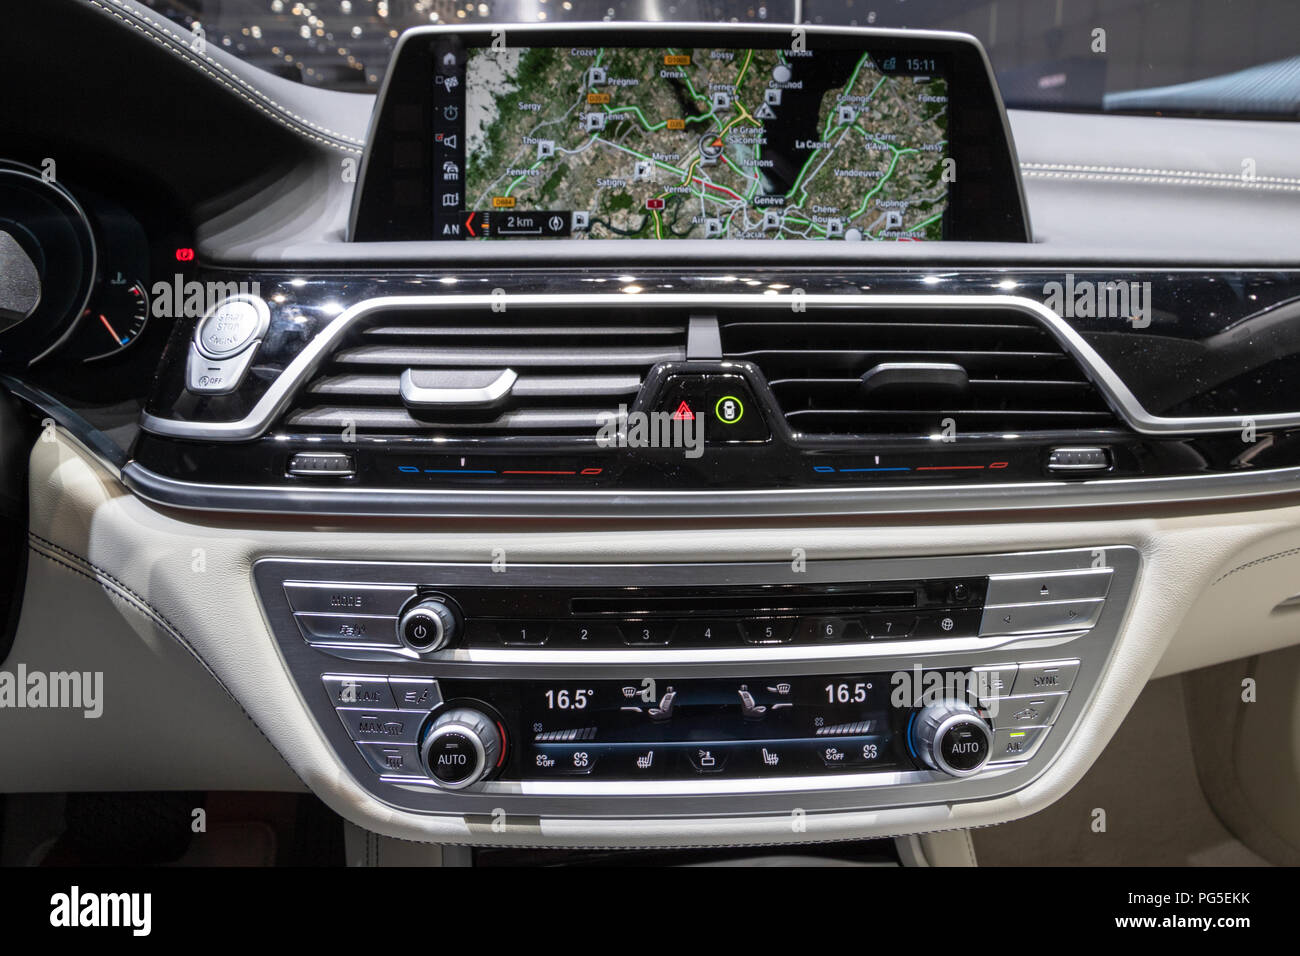 GENEVA, SWITZERLAND - MARCH 6, 2018: Dashboard console view of a BMW 7-series car showcased at the 88th Geneva International Motor Show. Stock Photo